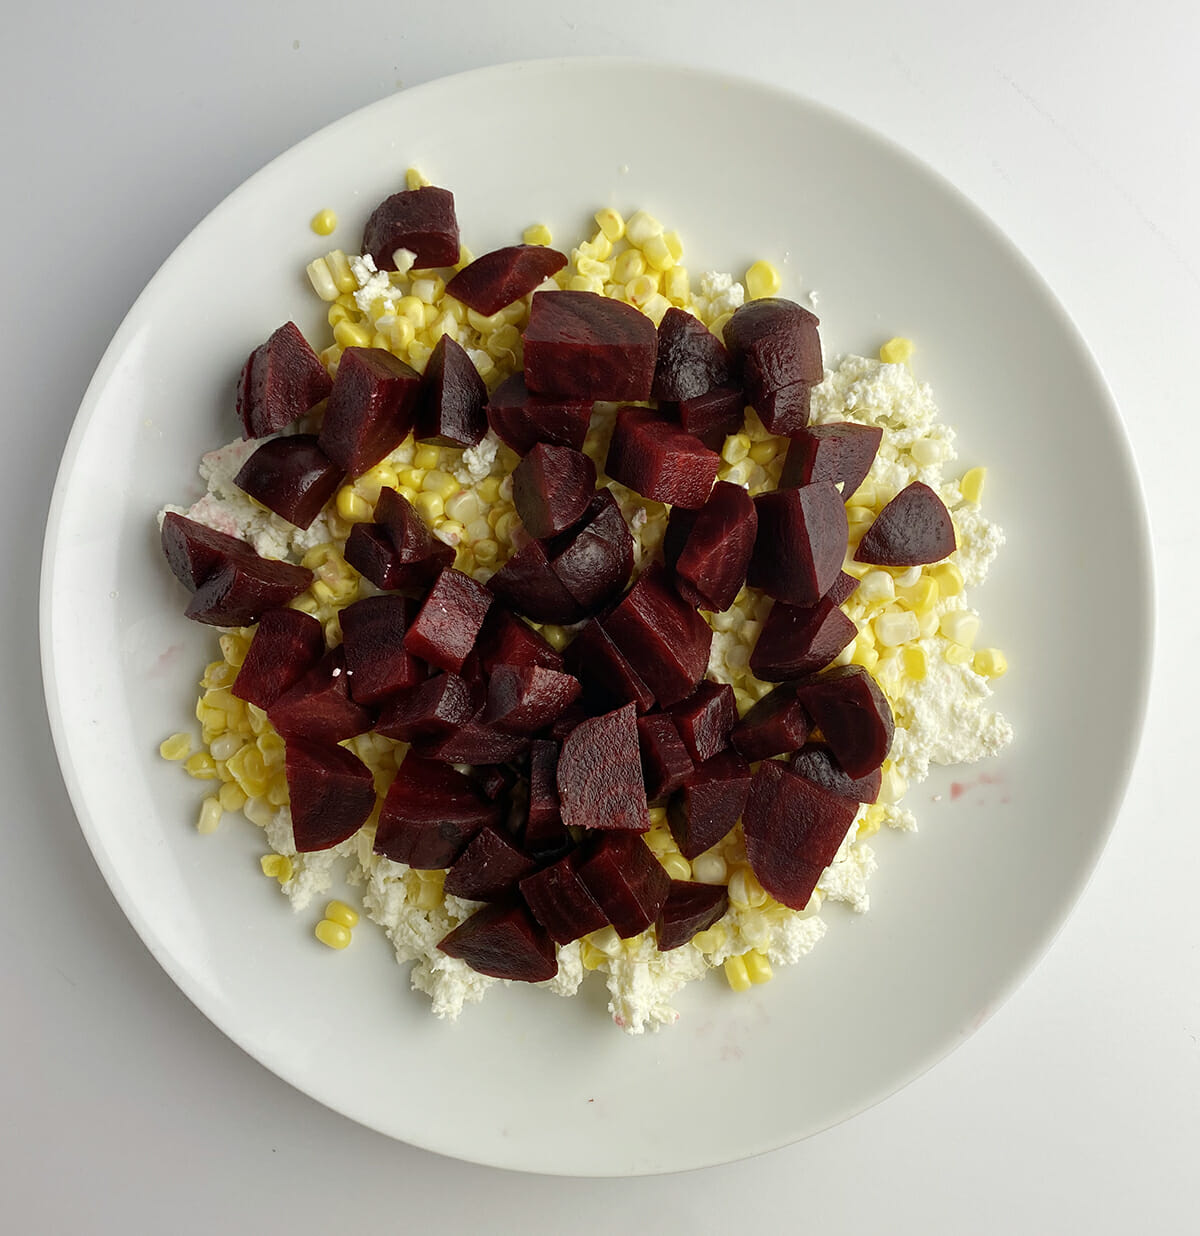 corn and beets over ricotta